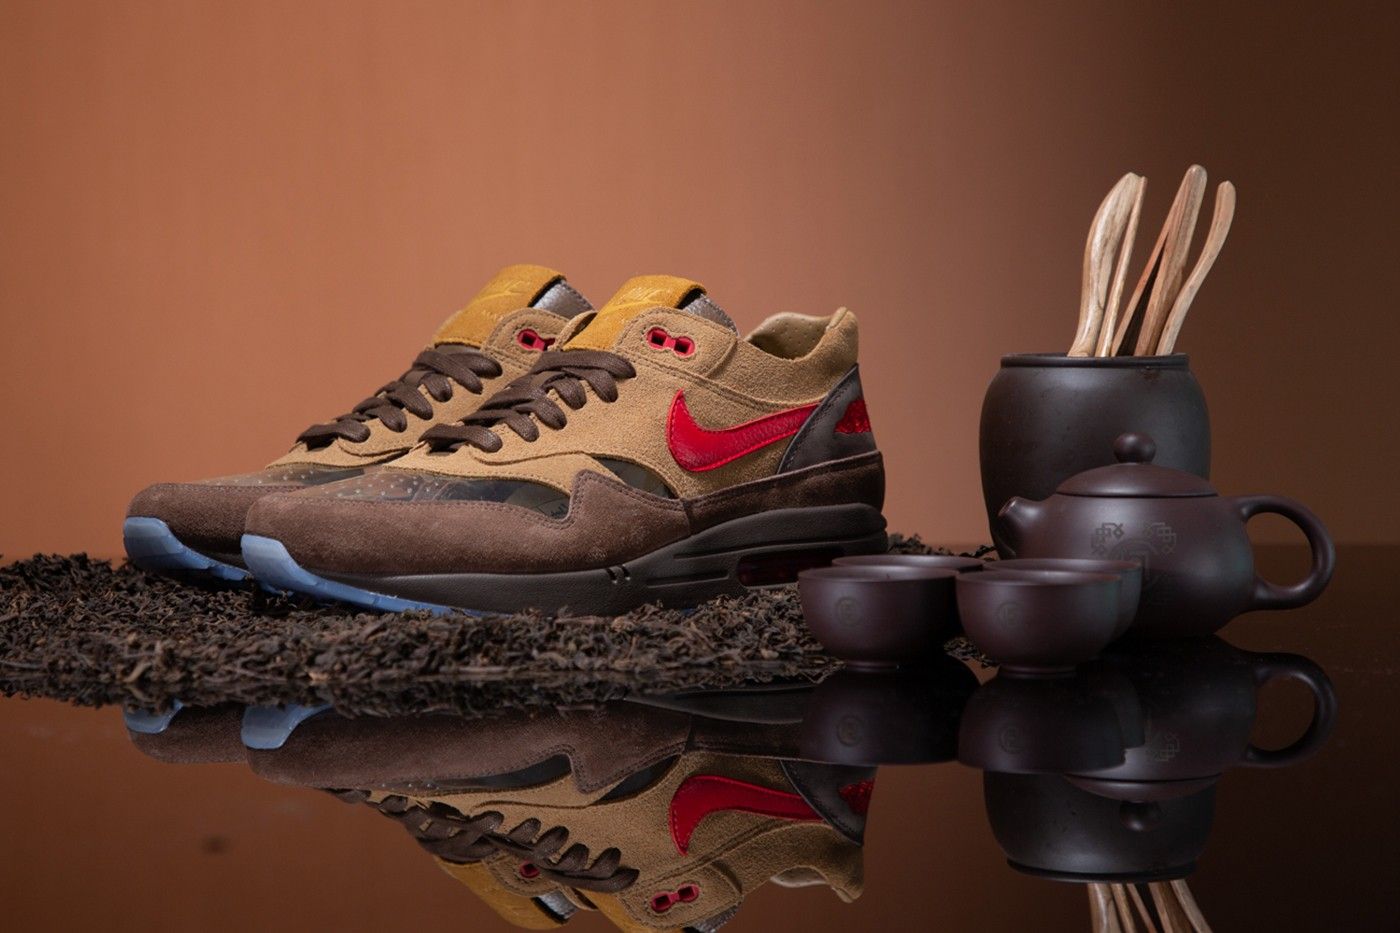 Official Reveal: CLOT x Nike Air Max 1 'Kiss of Death – Cha' is a 